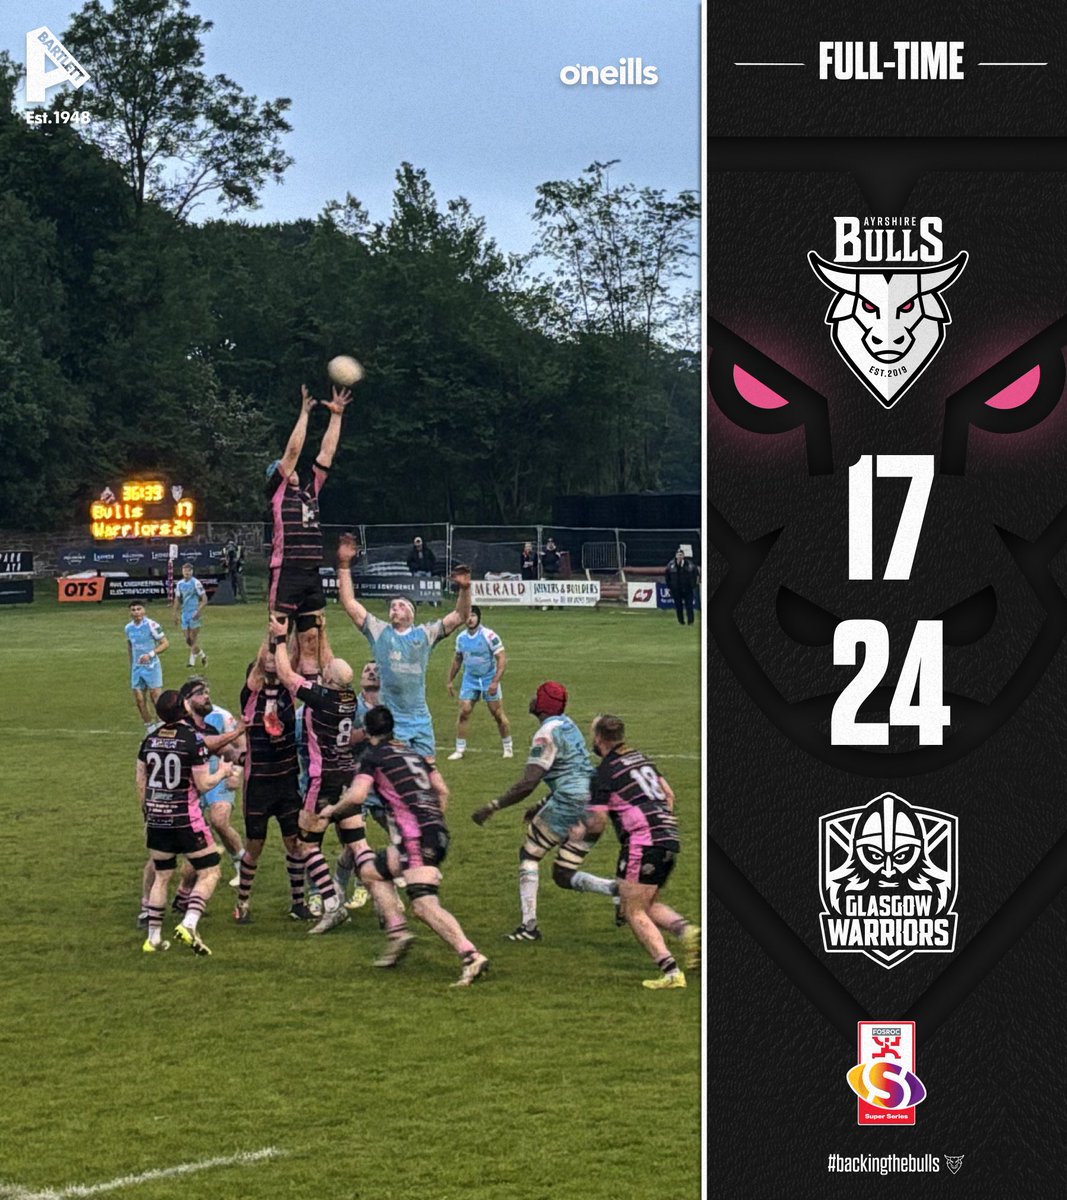 FULL-TIME Glasgow Warriors A get the victory at Millbrae in Round 5 of the FOSROC Super Series Sprint. Ayrshire Bulls 17-24 Glasgow Warriors A #backingthebulls | #FOSROCSuperSeries